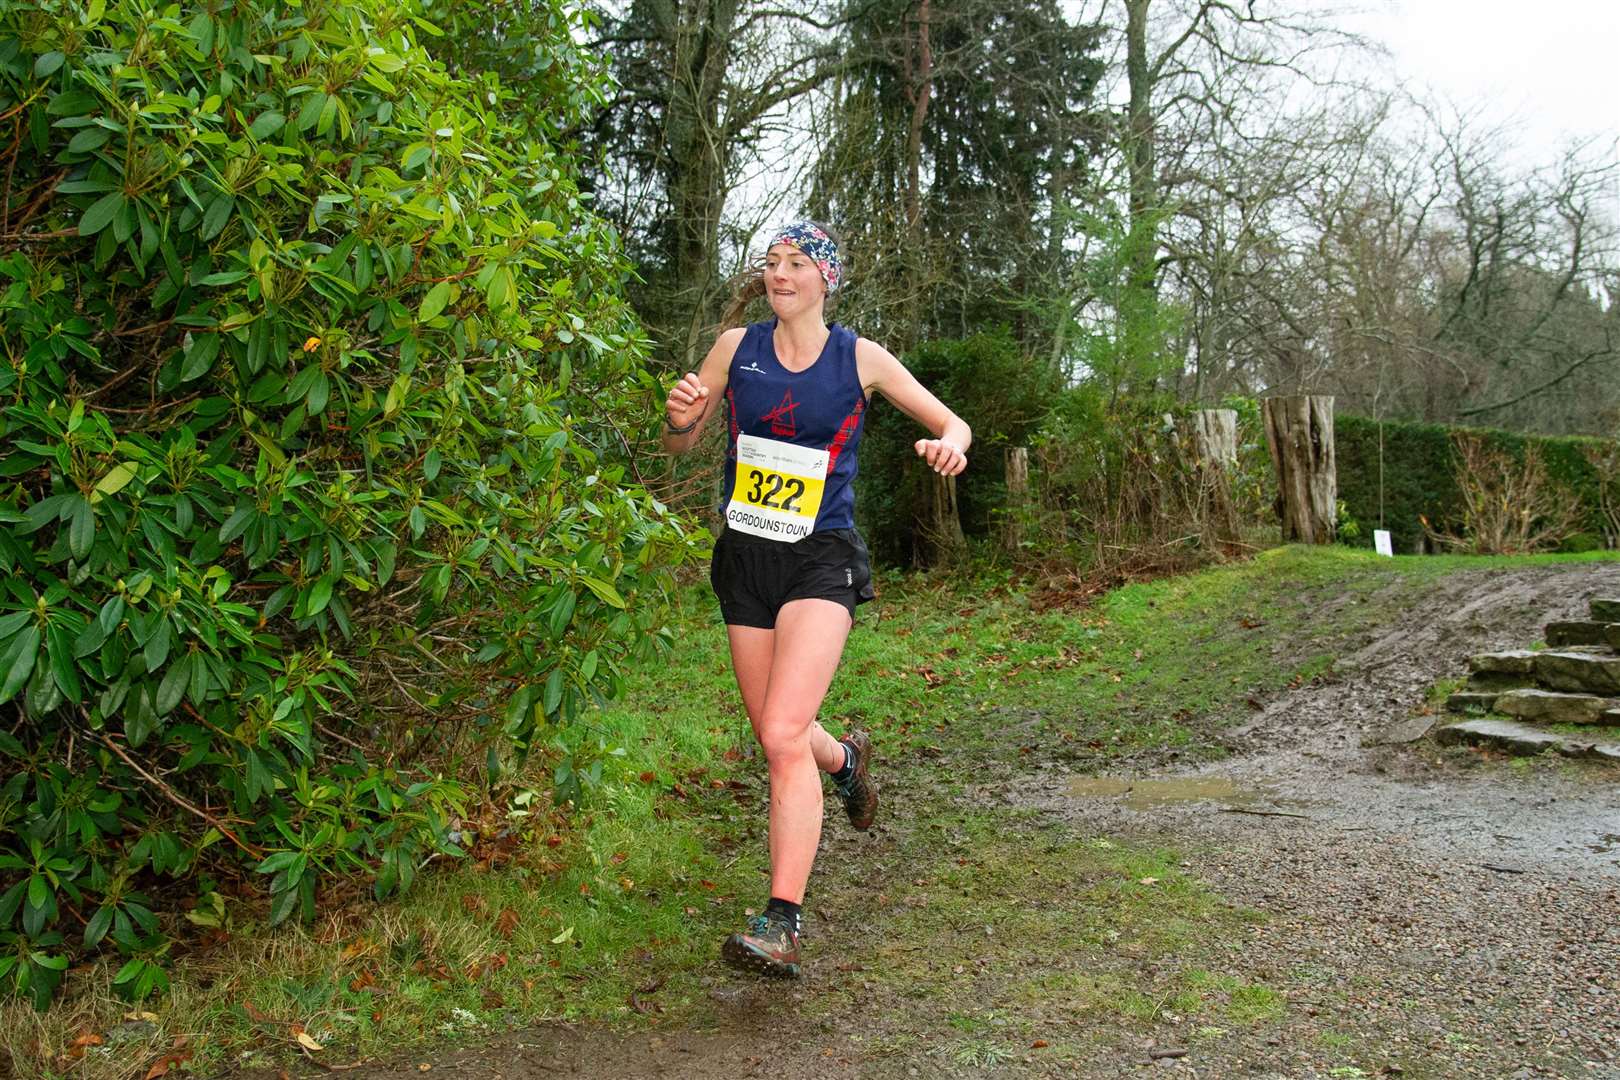 Kirstie Rogan finished the Senior Women's race in a time of 31:11 in second overall. Picture: Daniel Forsyth..